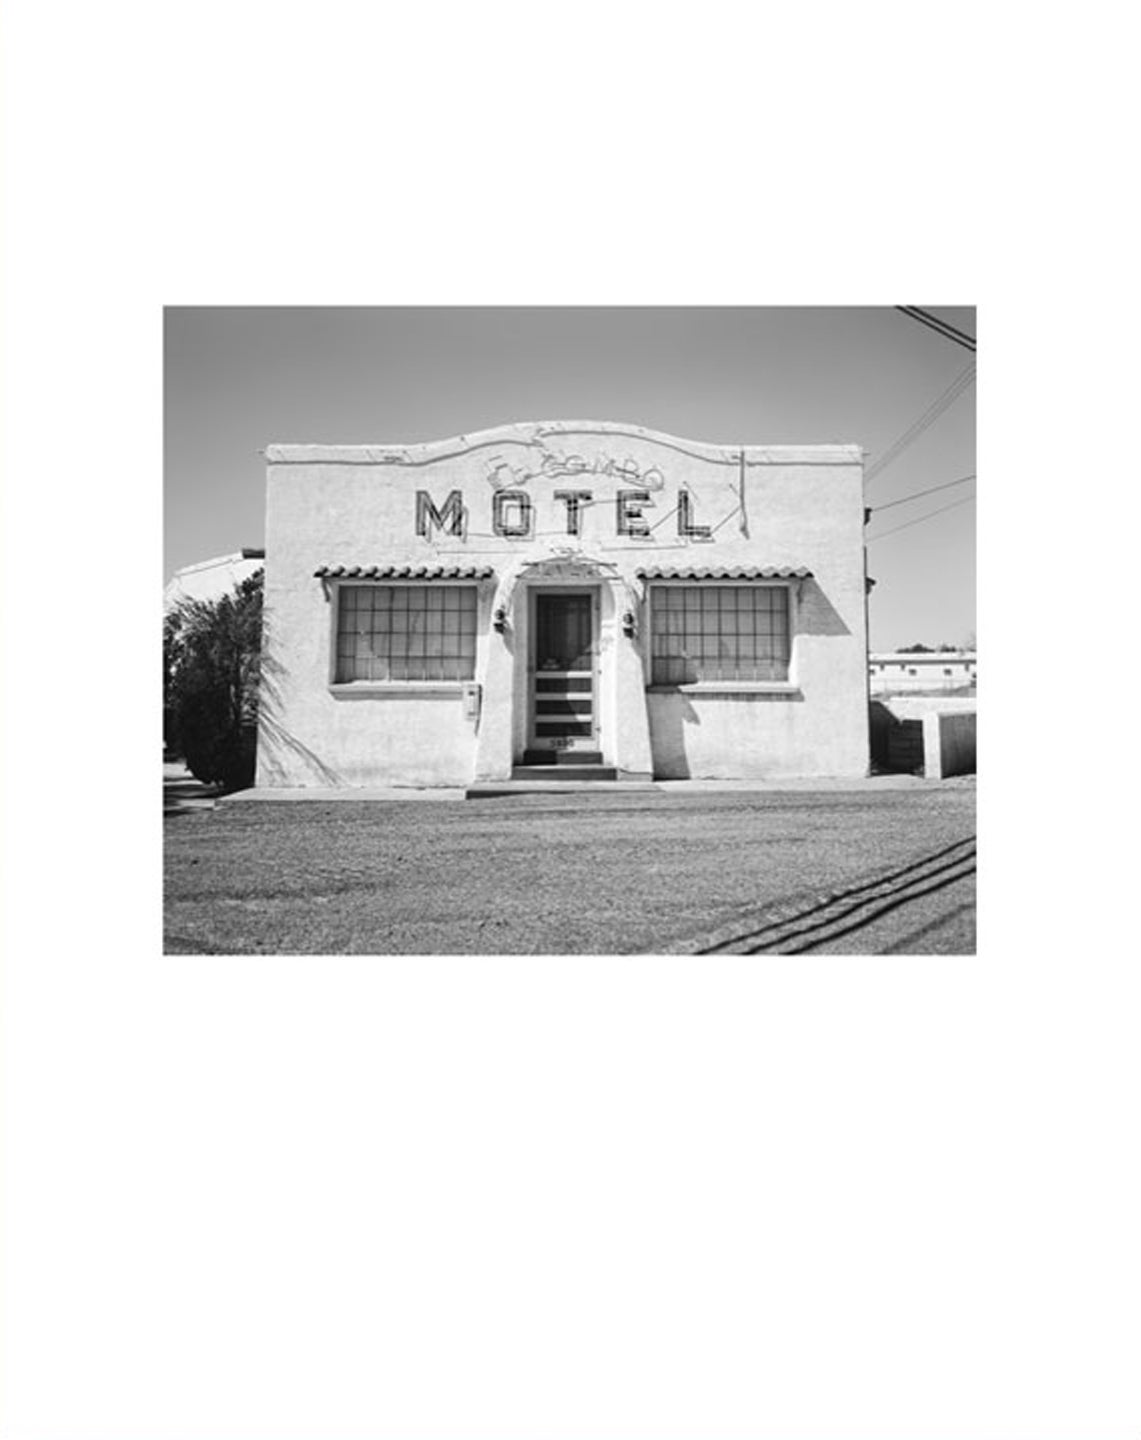 NZ Library #1: John Schott: Route 66, Special Limited Edition (with Gelatin Silver Contact Print "Untitled" from the Series "Route 66 Motels," Tipis with Television Antennas, Truck and Palm Trees) (NZ Library - Set One, Volume Six)